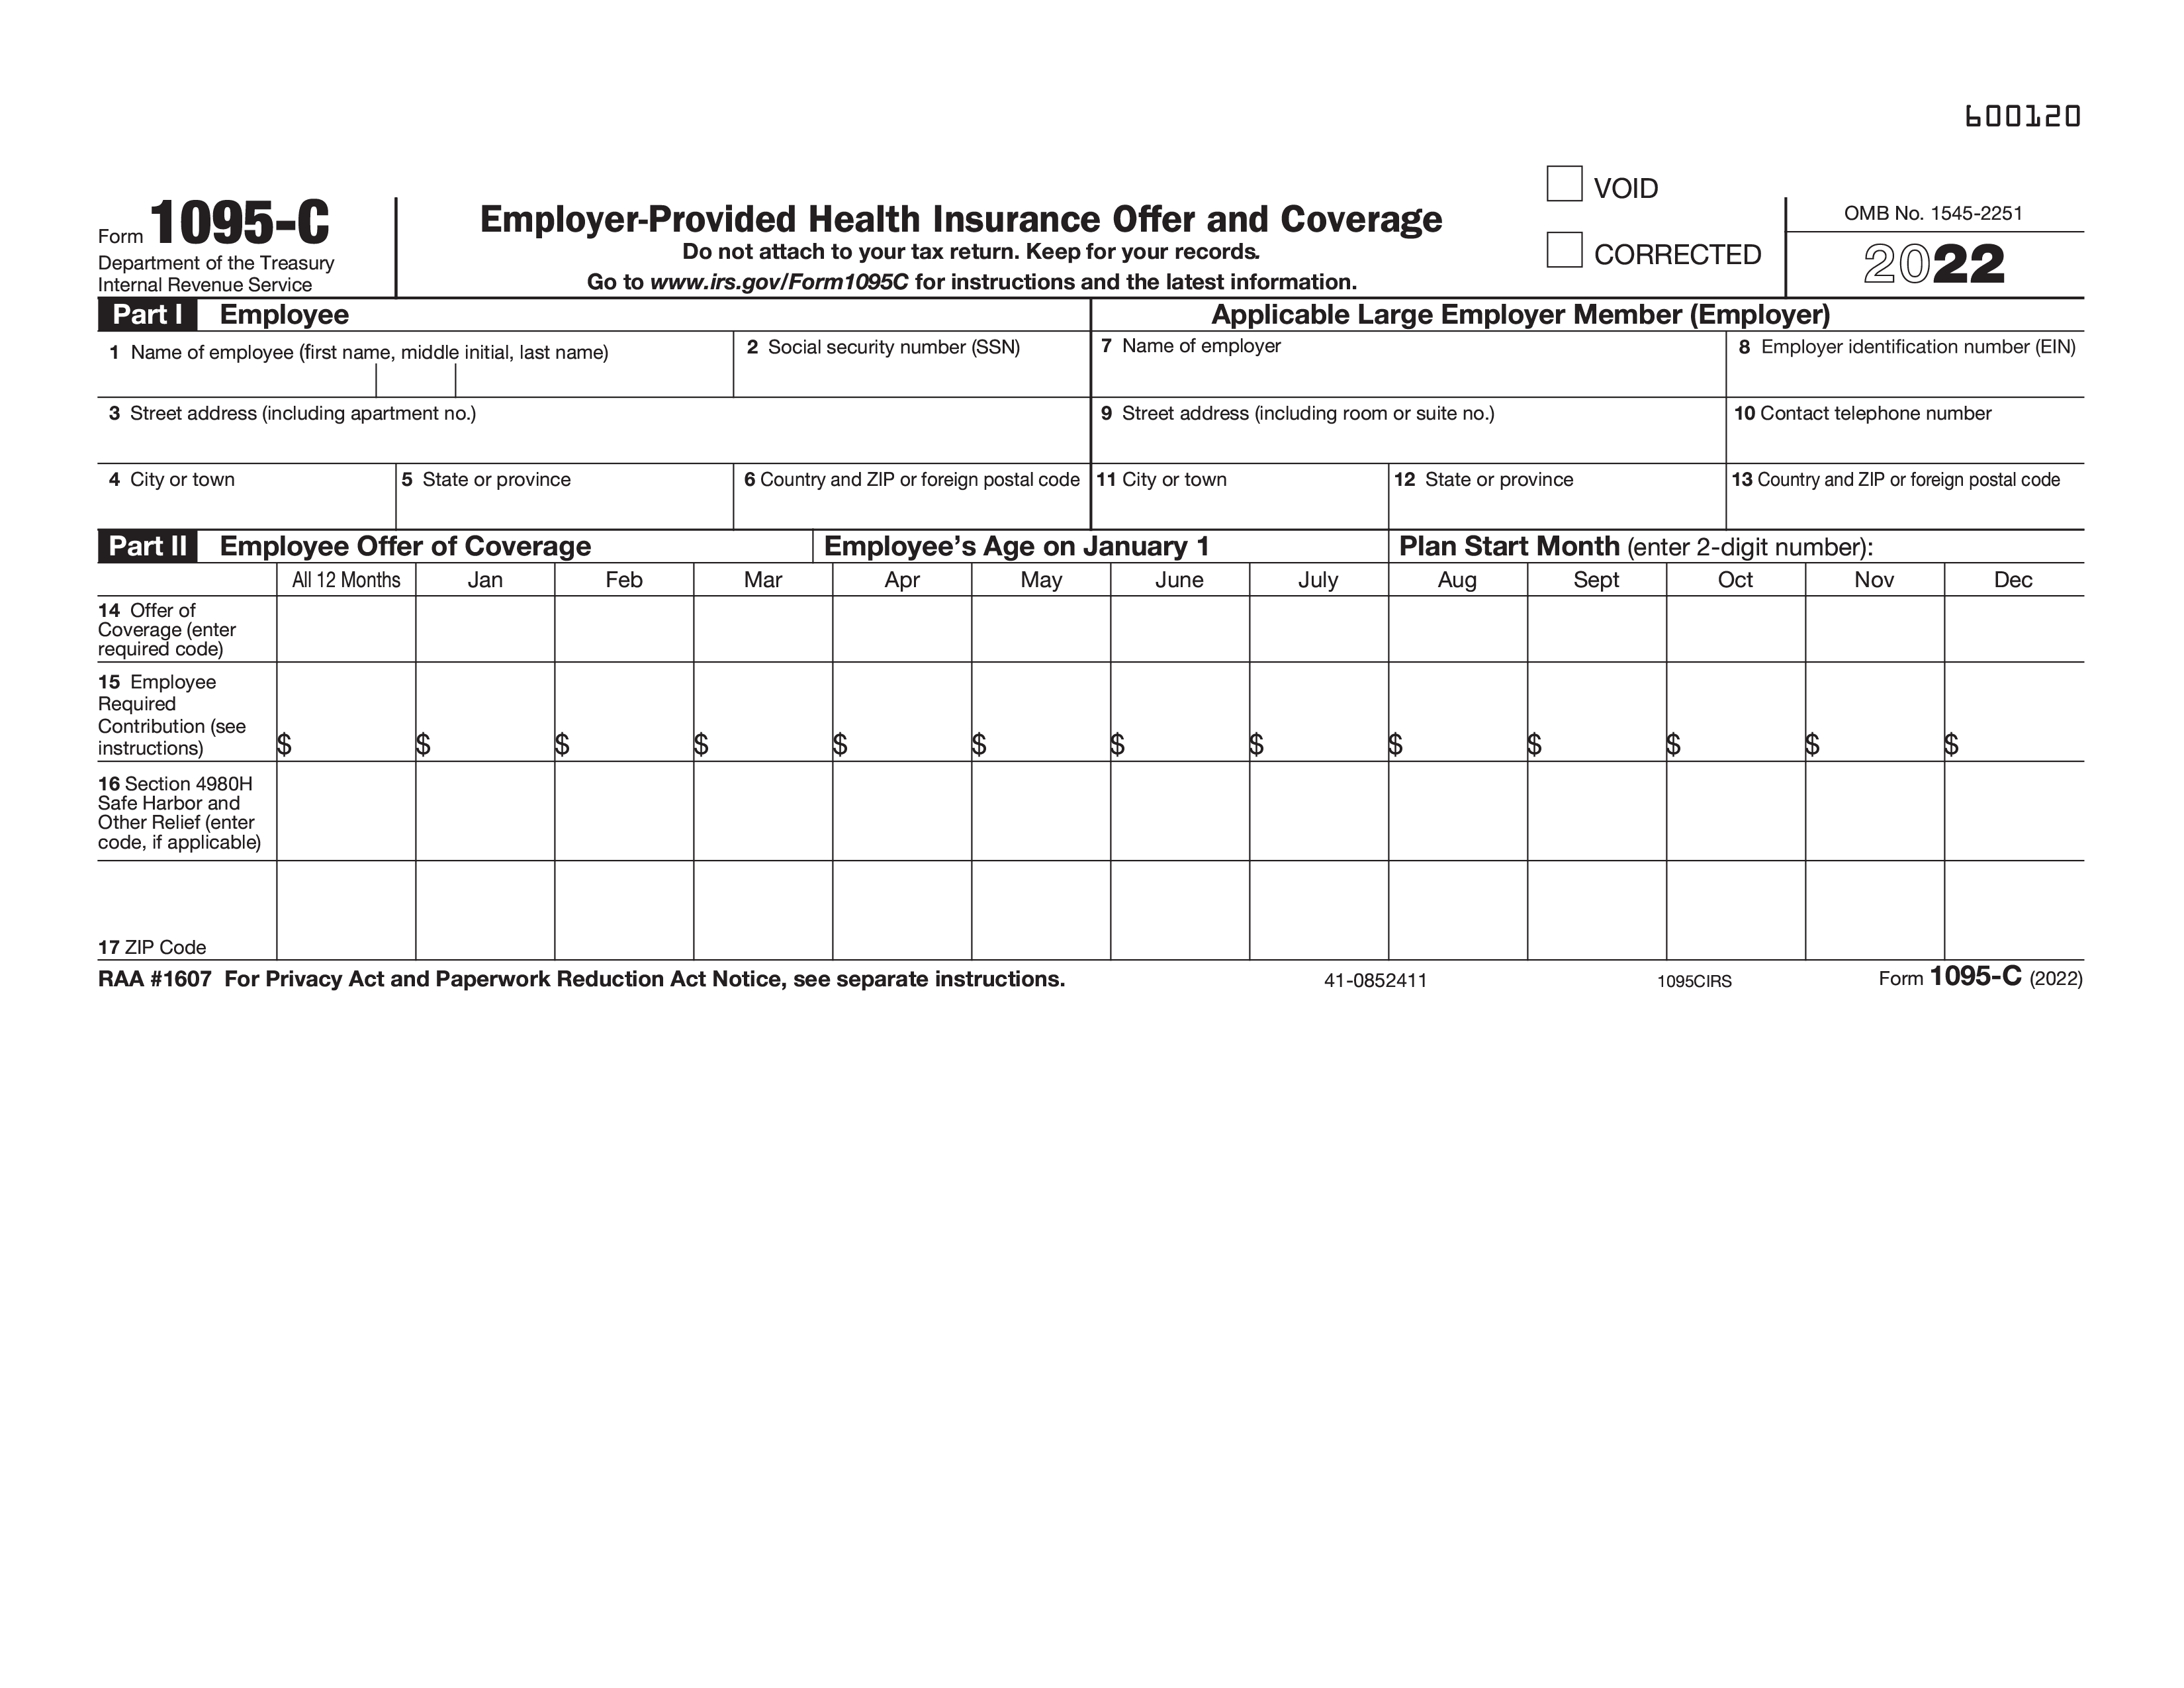 1095-C IRS Employer-Provided Health Insurance Full Page Landscape Version